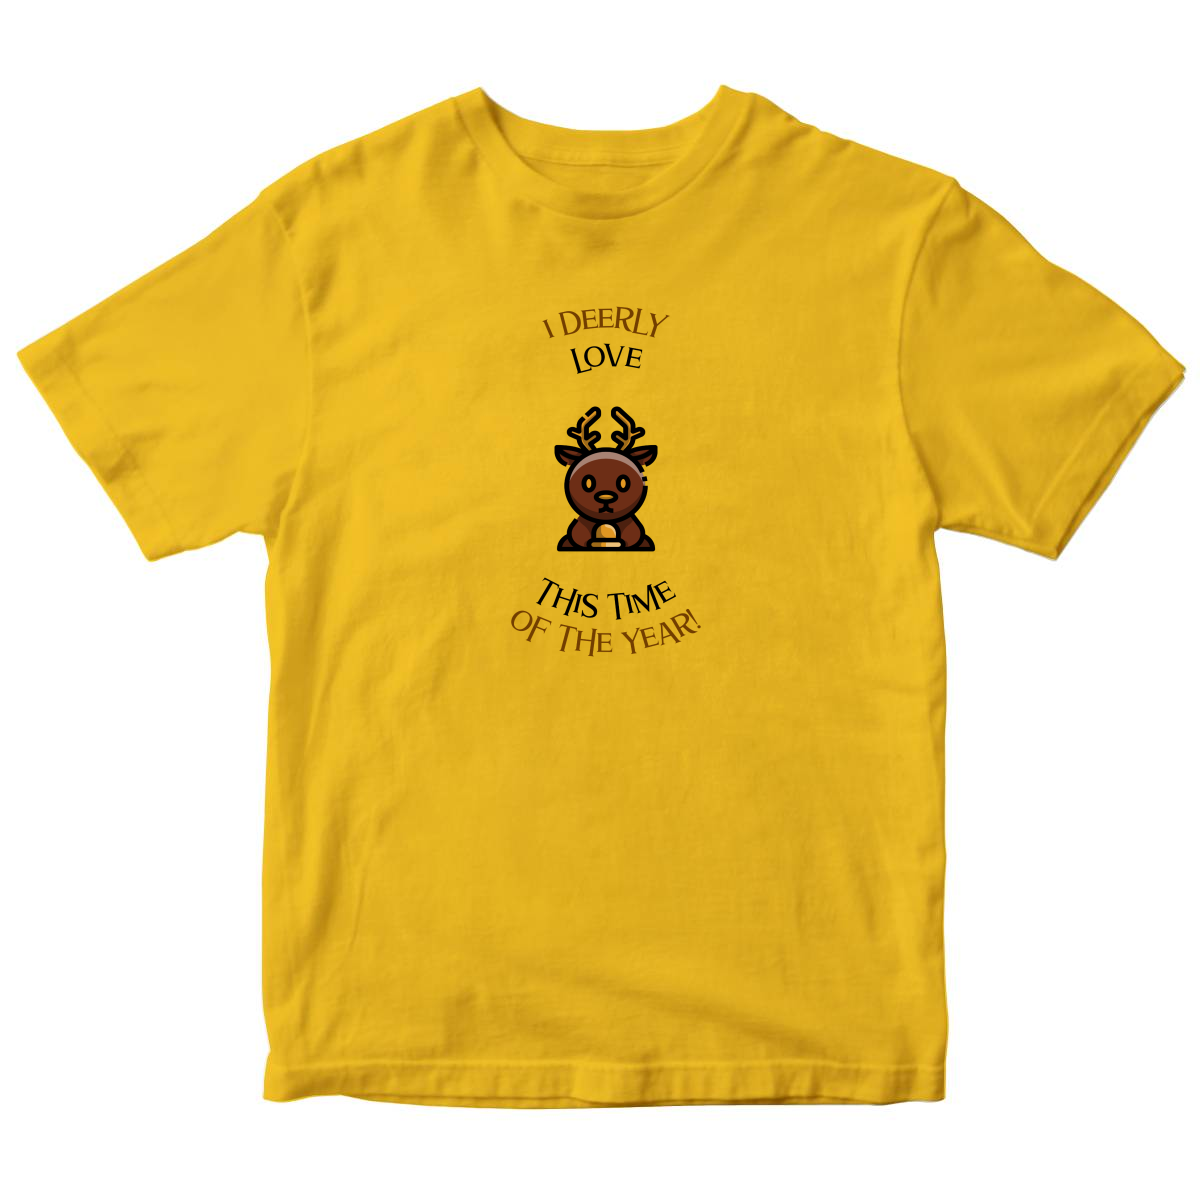 I Deerly Love This Time of the Year! Kids T-shirt | Yellow